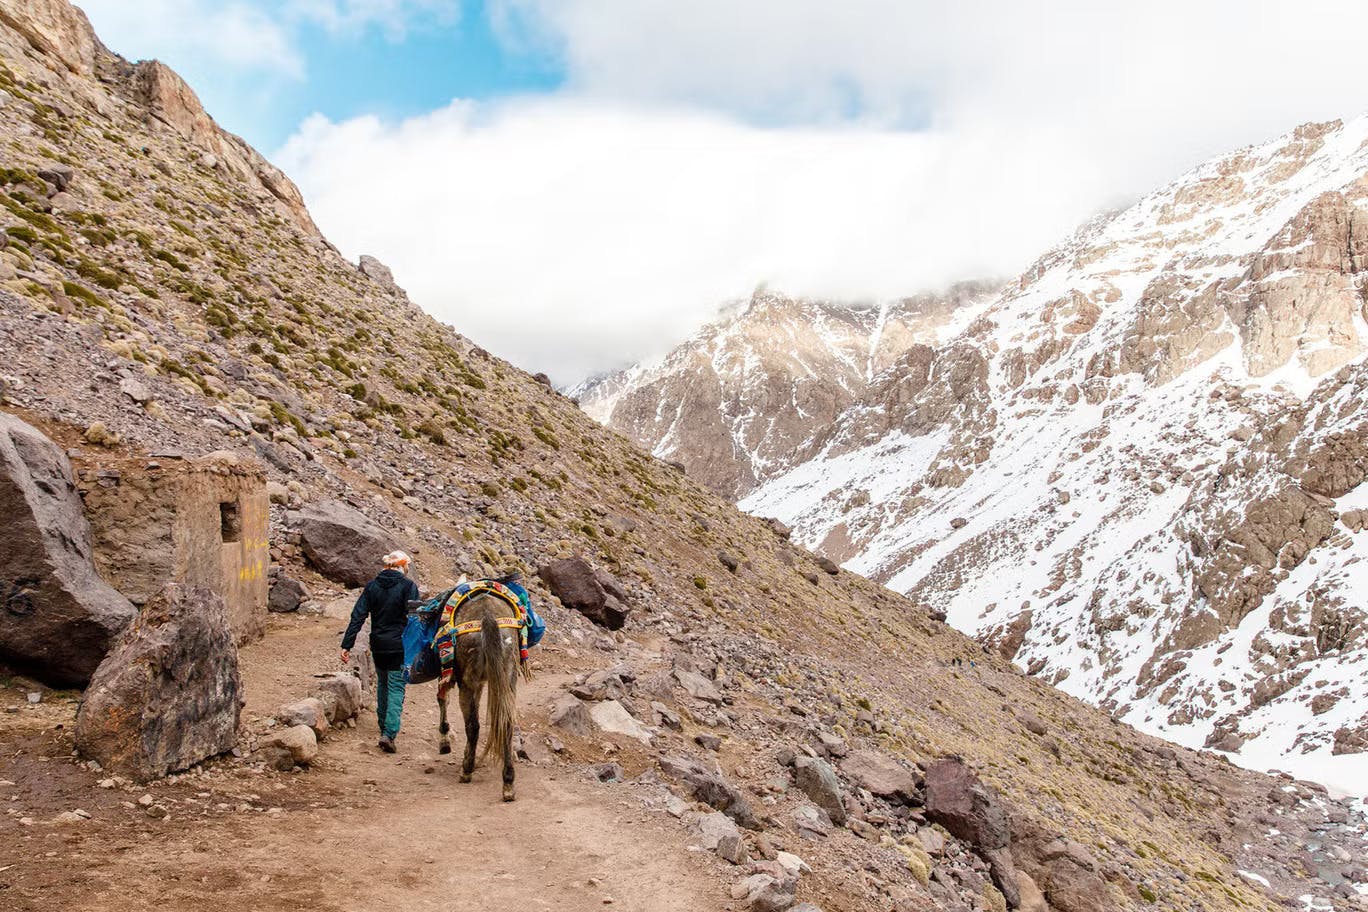 Hiking in the High Atlas Mountains of Morocco